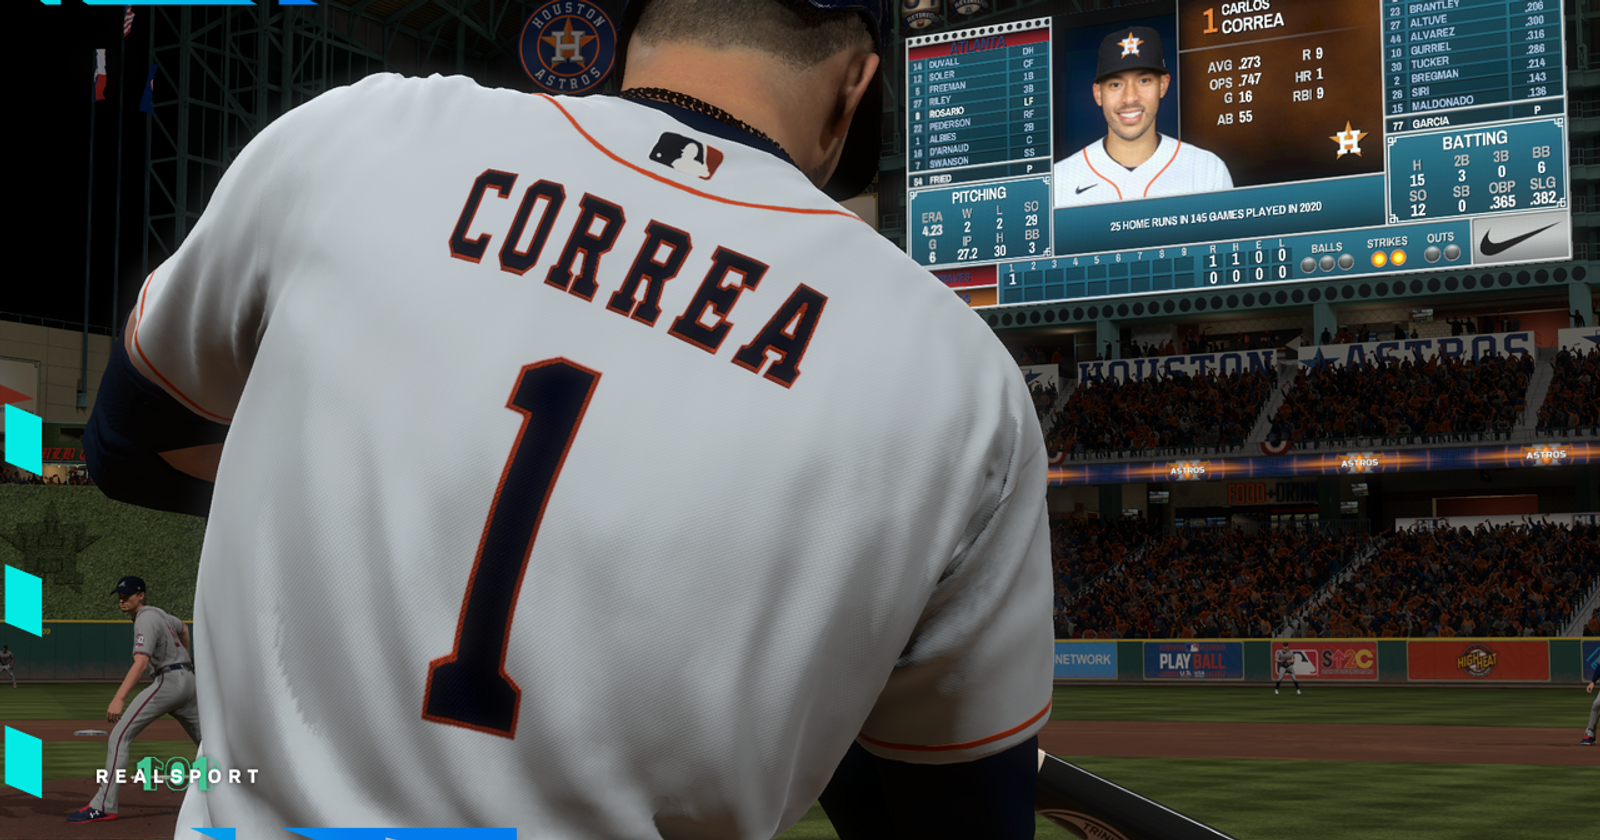 MLB The Show 21 Roster Update Predictions for Final Diamond Dynasty Ratings